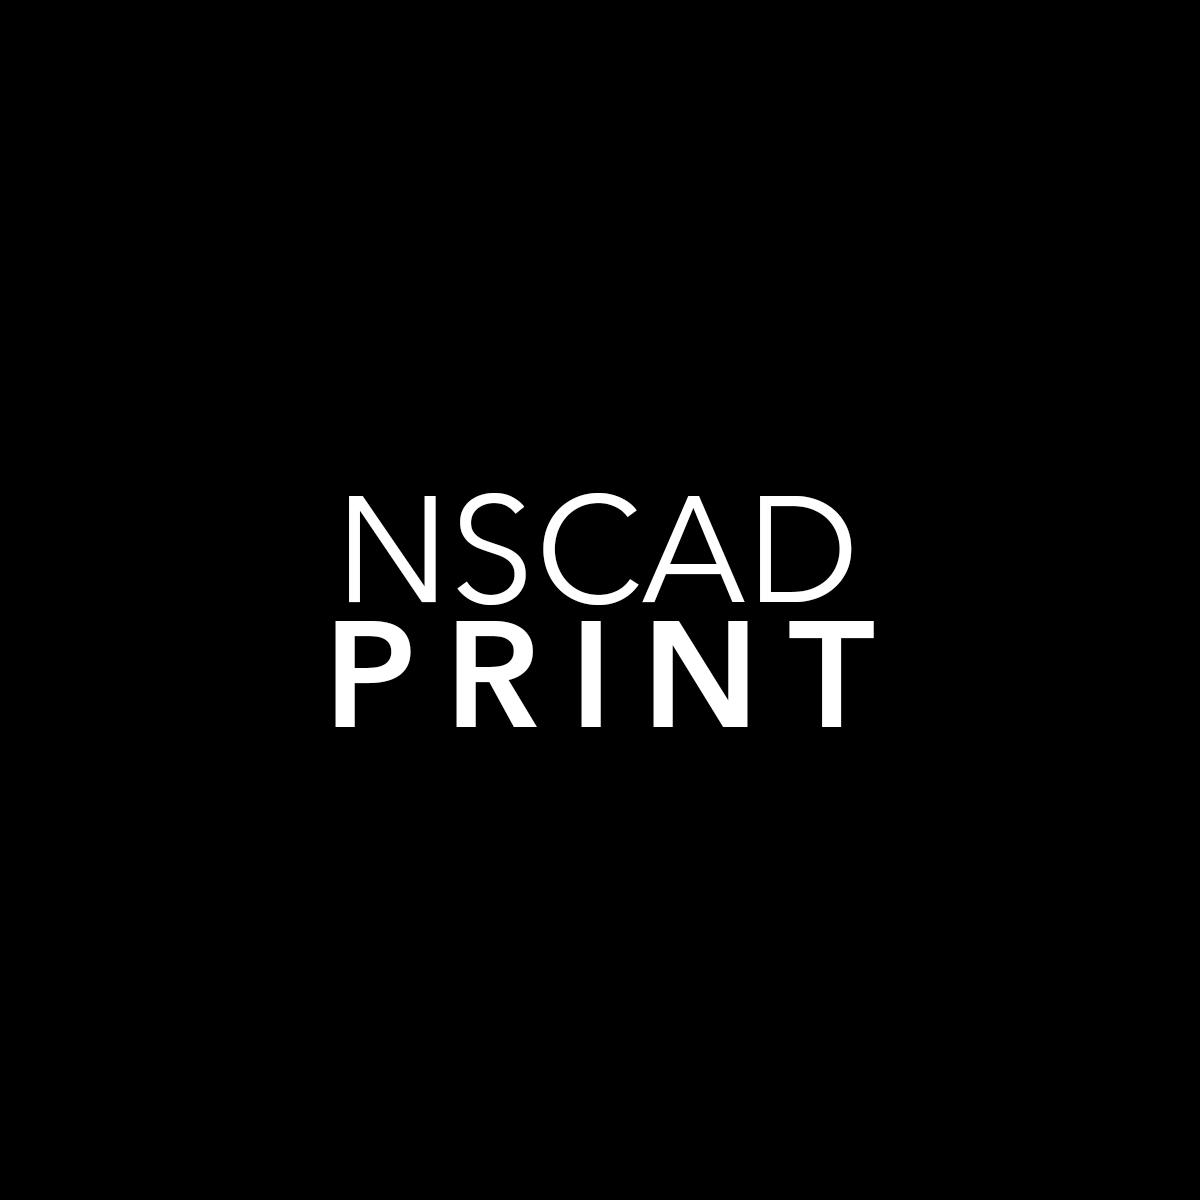 White text that reads "NSCAD PRINT" on a black background